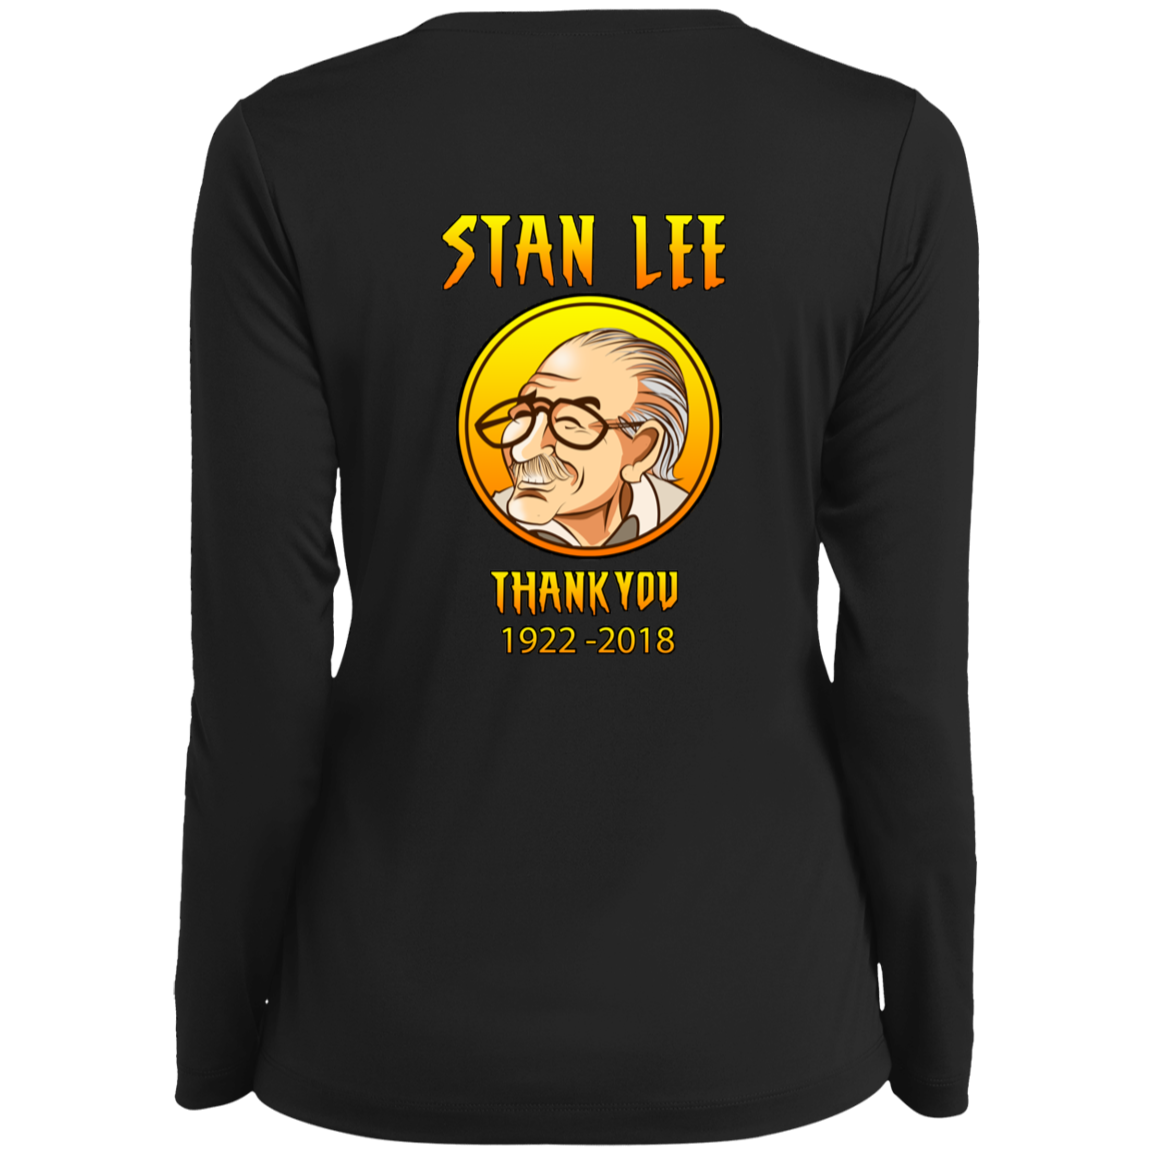 ArtichokeUSA Character and Font design. Stan Lee Thank You Fan Art. Let's Create Your Own Design Today. Ladies’ Long Sleeve Performance V-Neck Tee